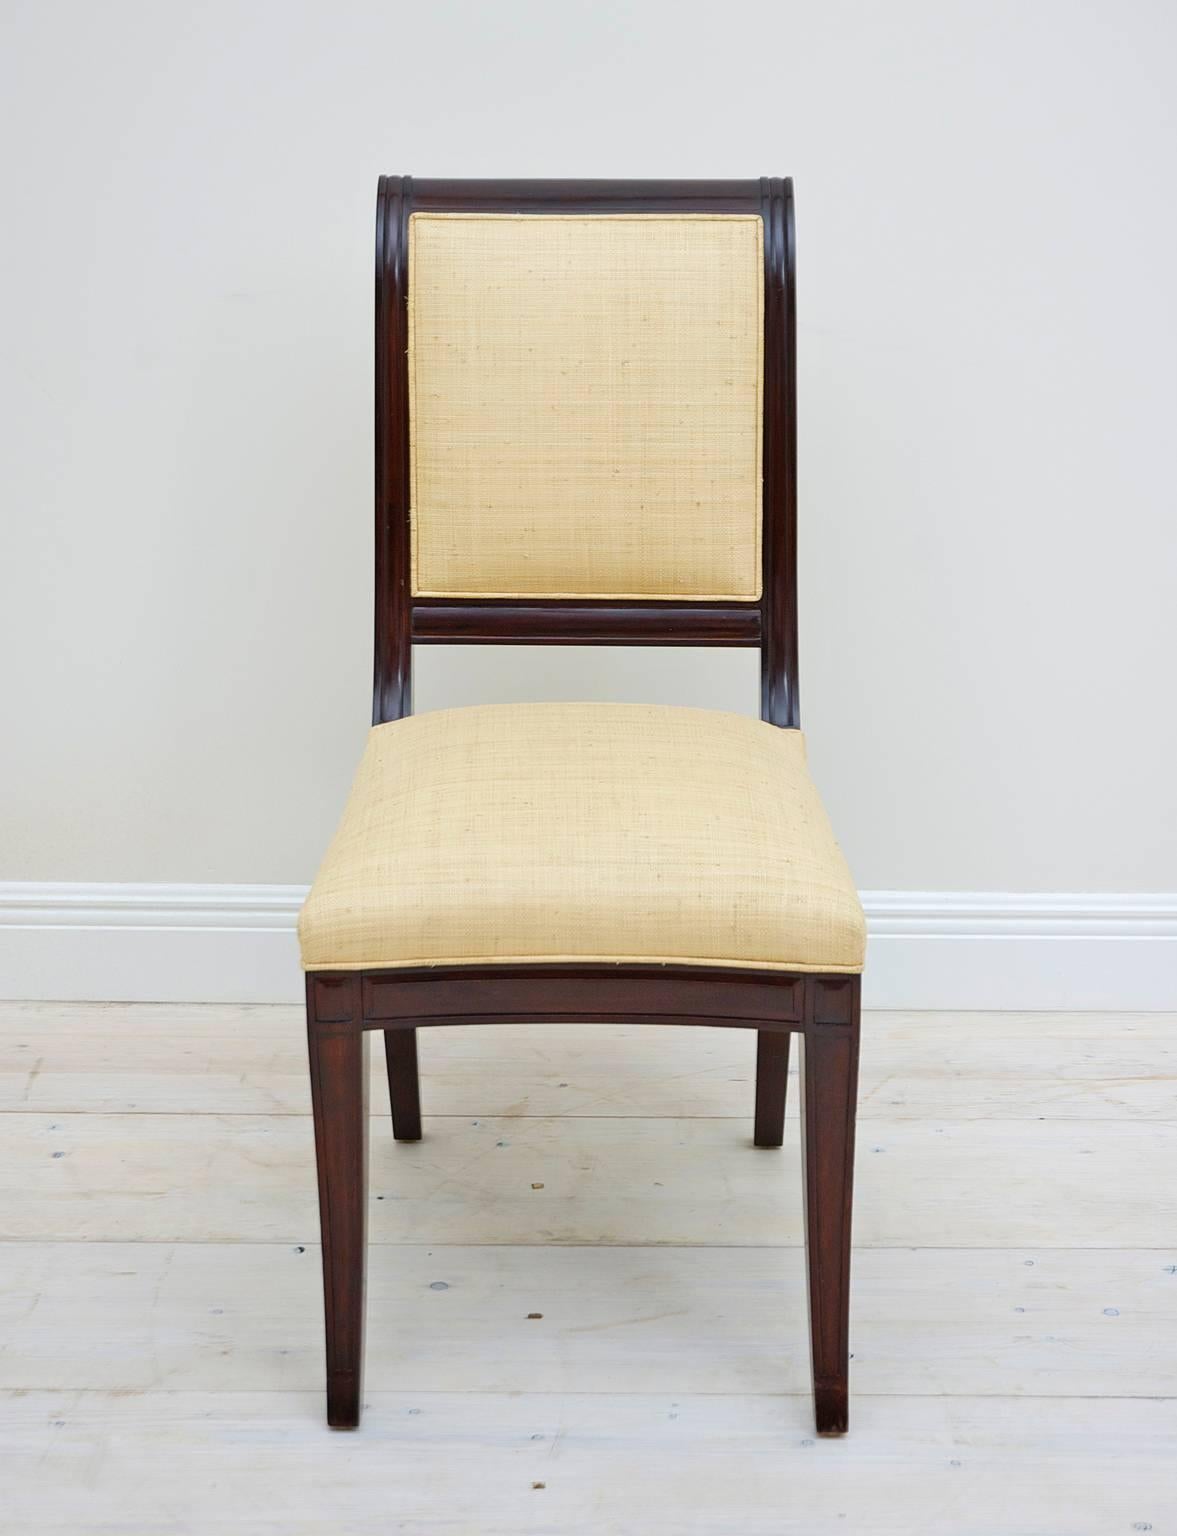 A set of 12 very impressive, handmade early 20th century British colonial dining chairs in the Empire style are upholstered in woven Madagascar and fabricated out of very fine and dense mahogany. Chairs are have an impressive weight and are